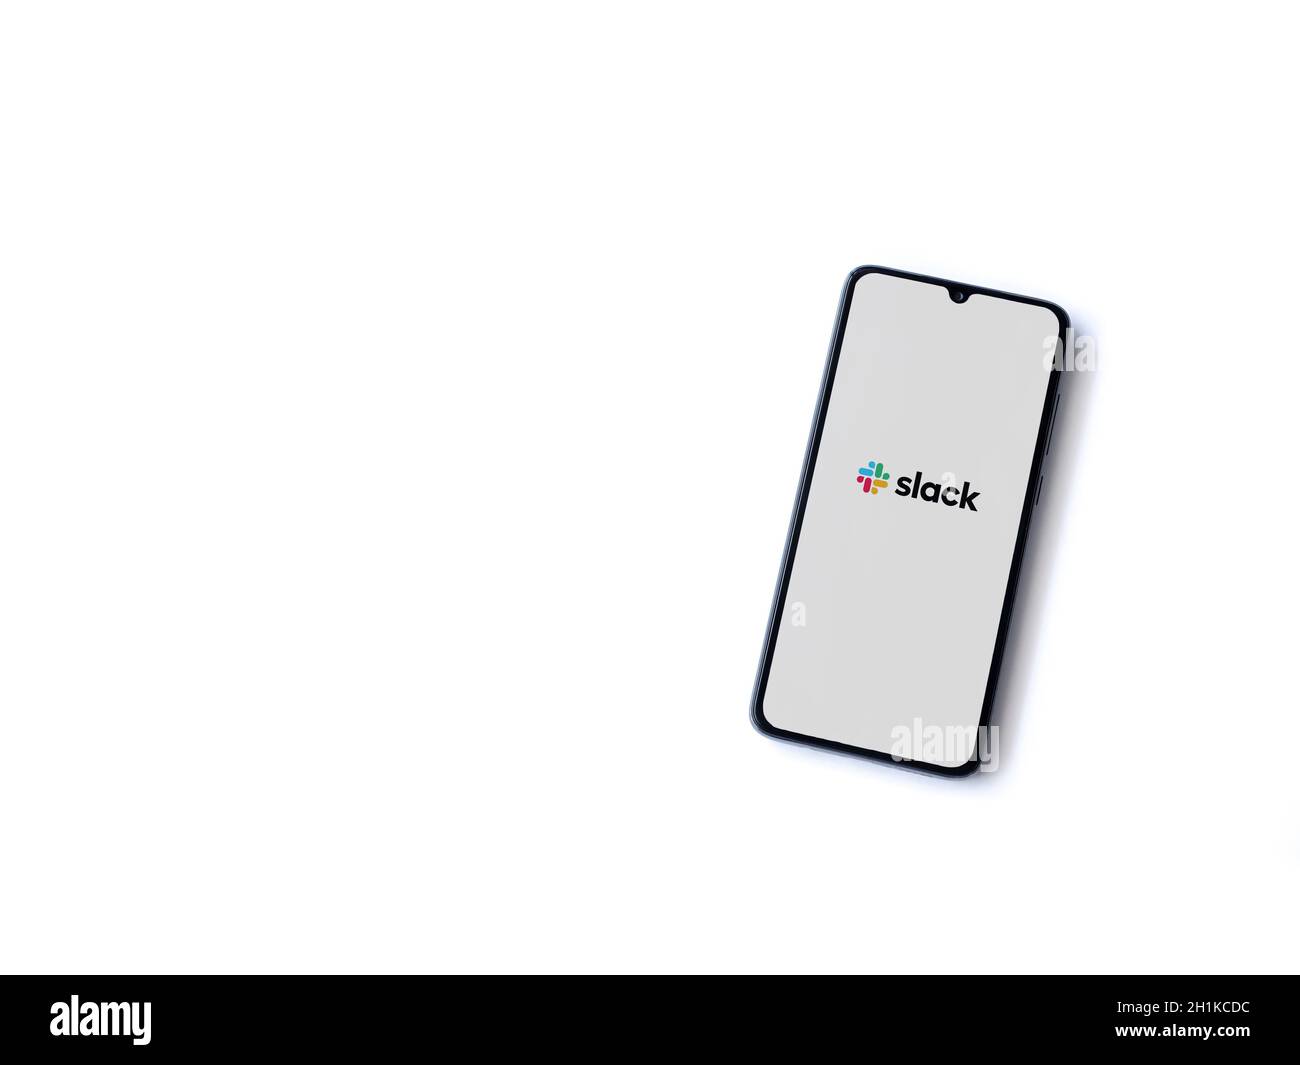 Lod, Israel - July 8, 2020: Slack app launch screen with logo on the display of a black mobile smartphone isolated on white background. Top view flat Stock Photo